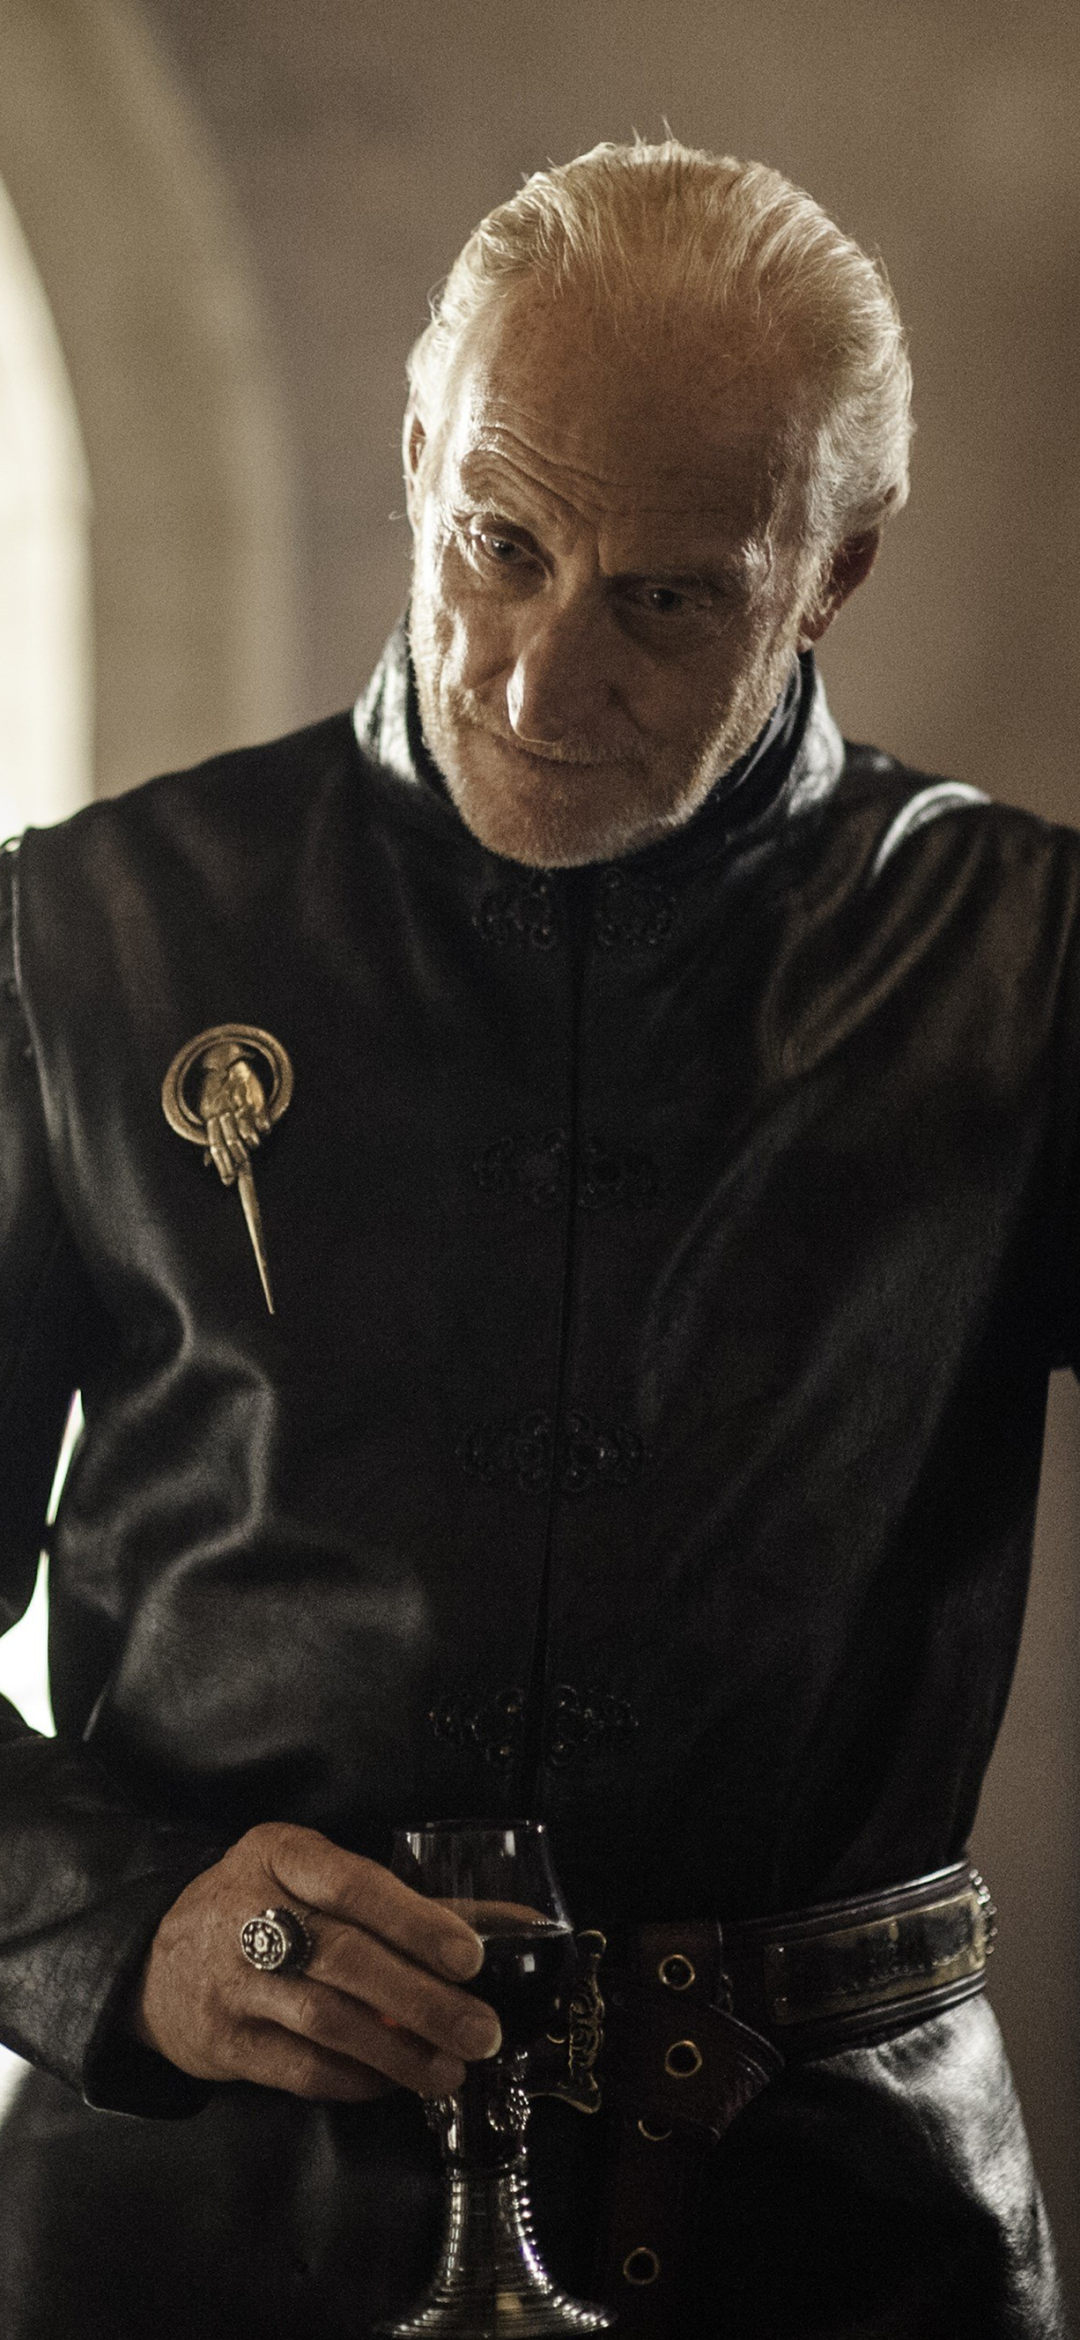  Tywin Lannister HQ Background Images